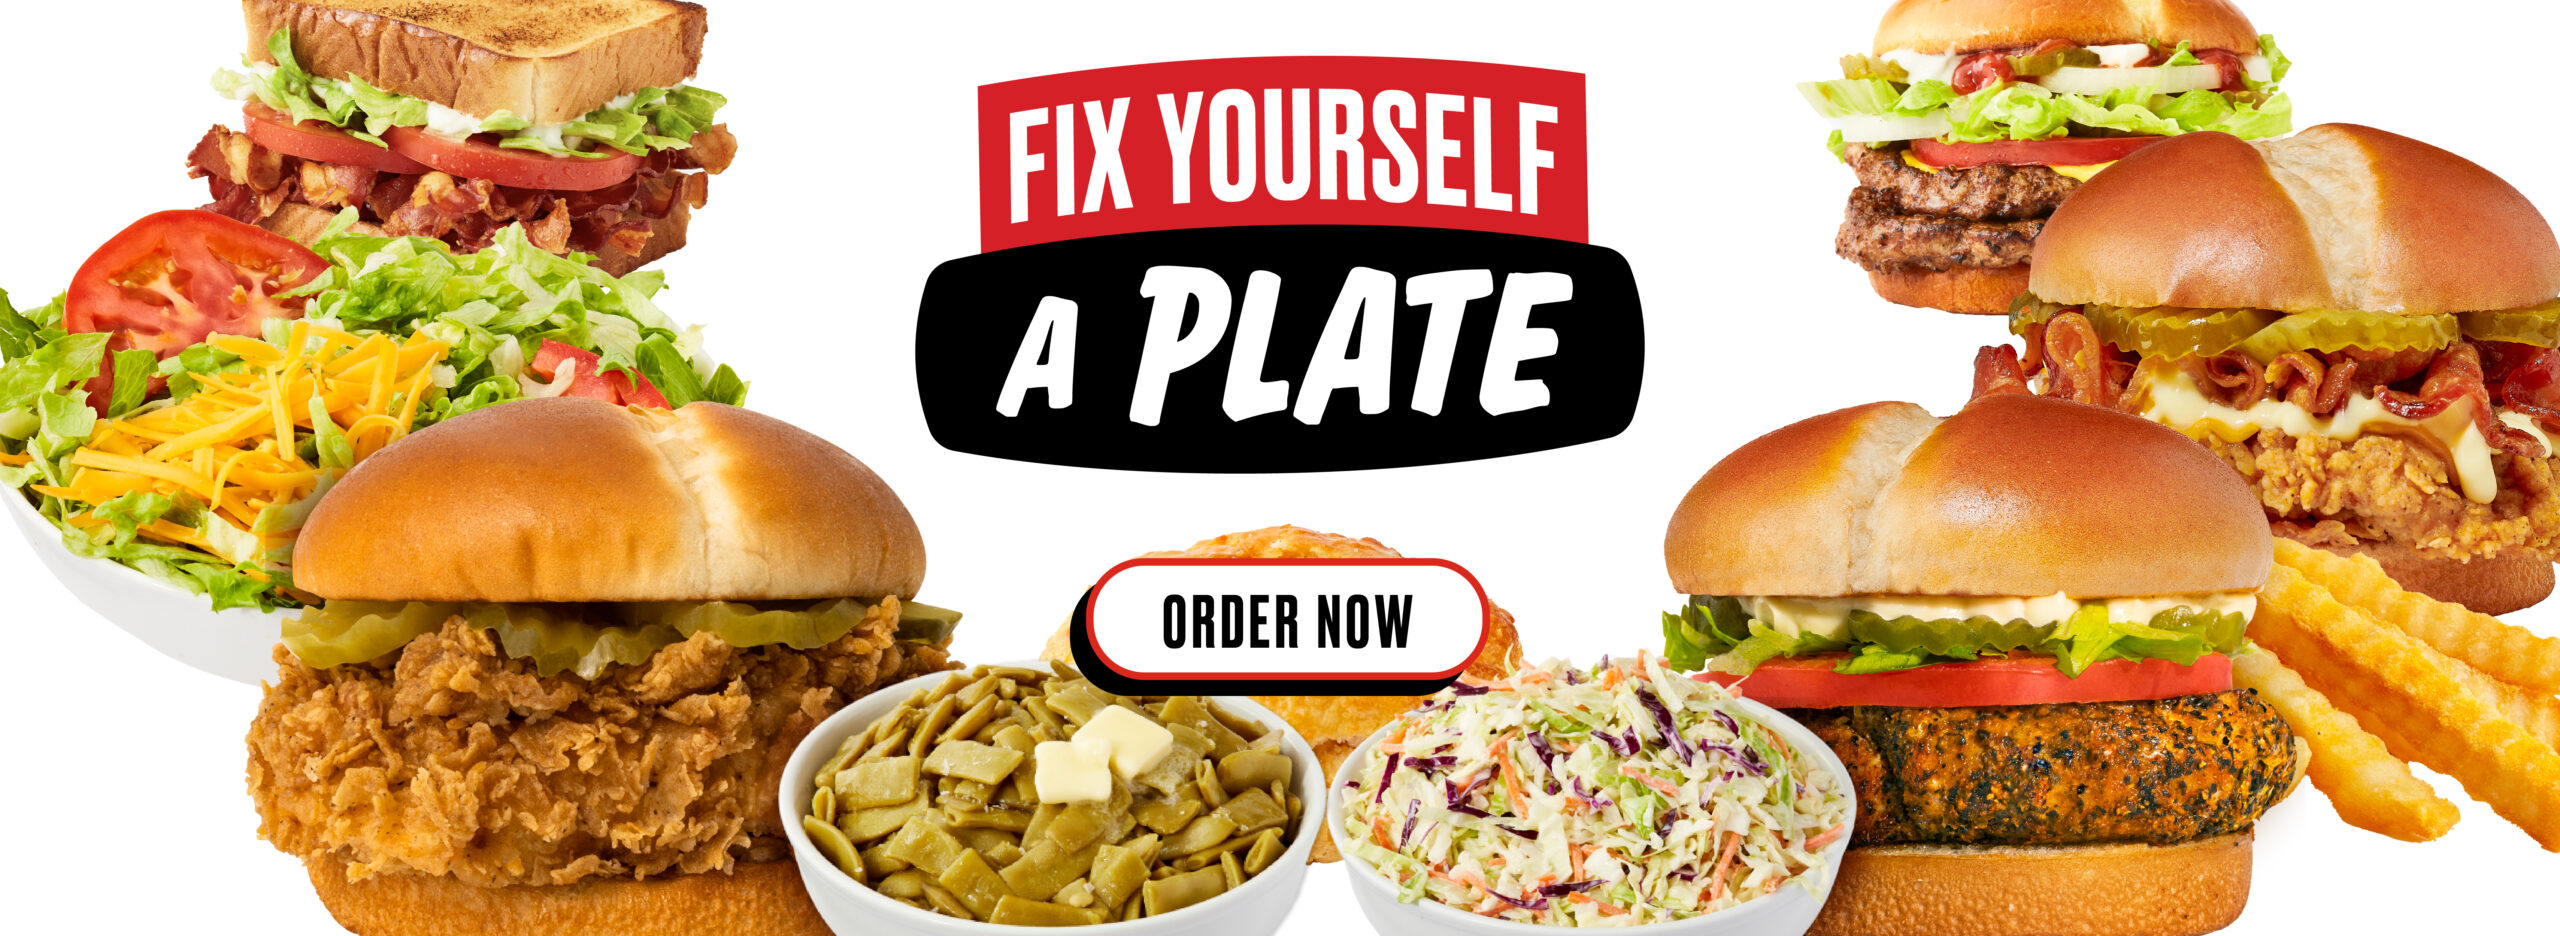 fix yourself a plate carousel